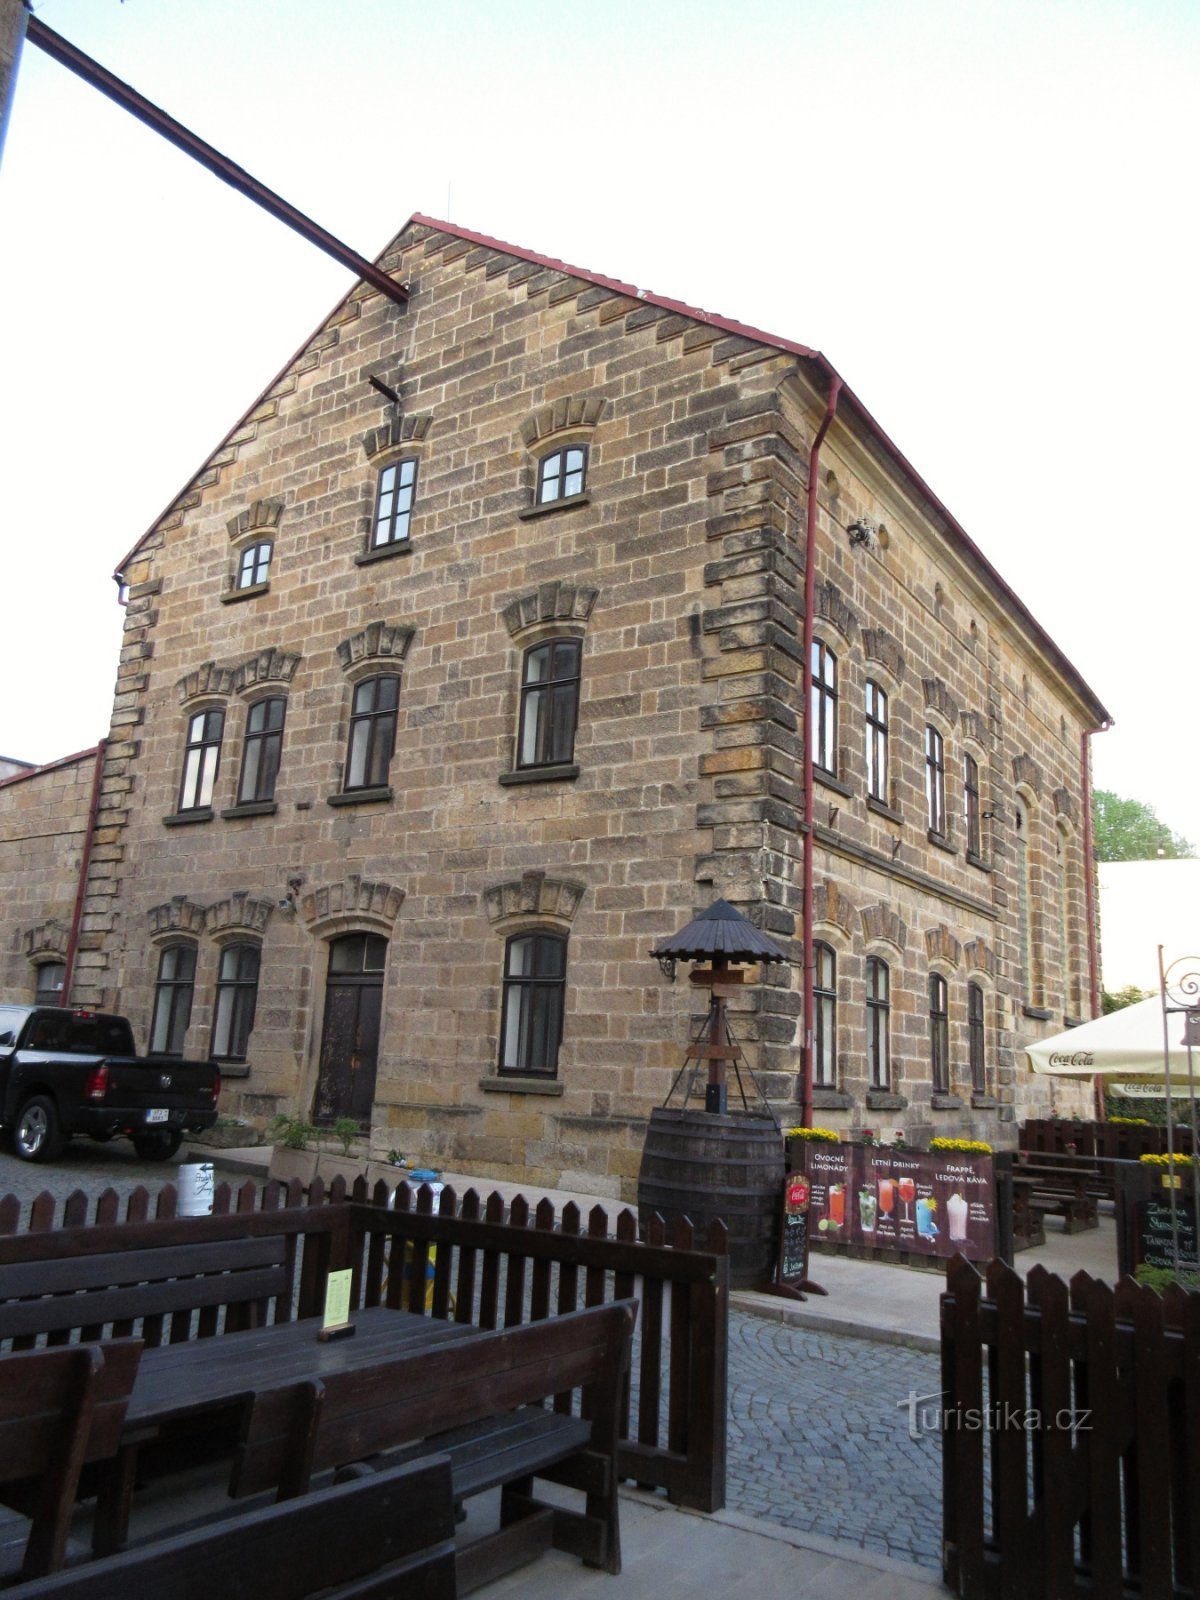 The premises of the brewery